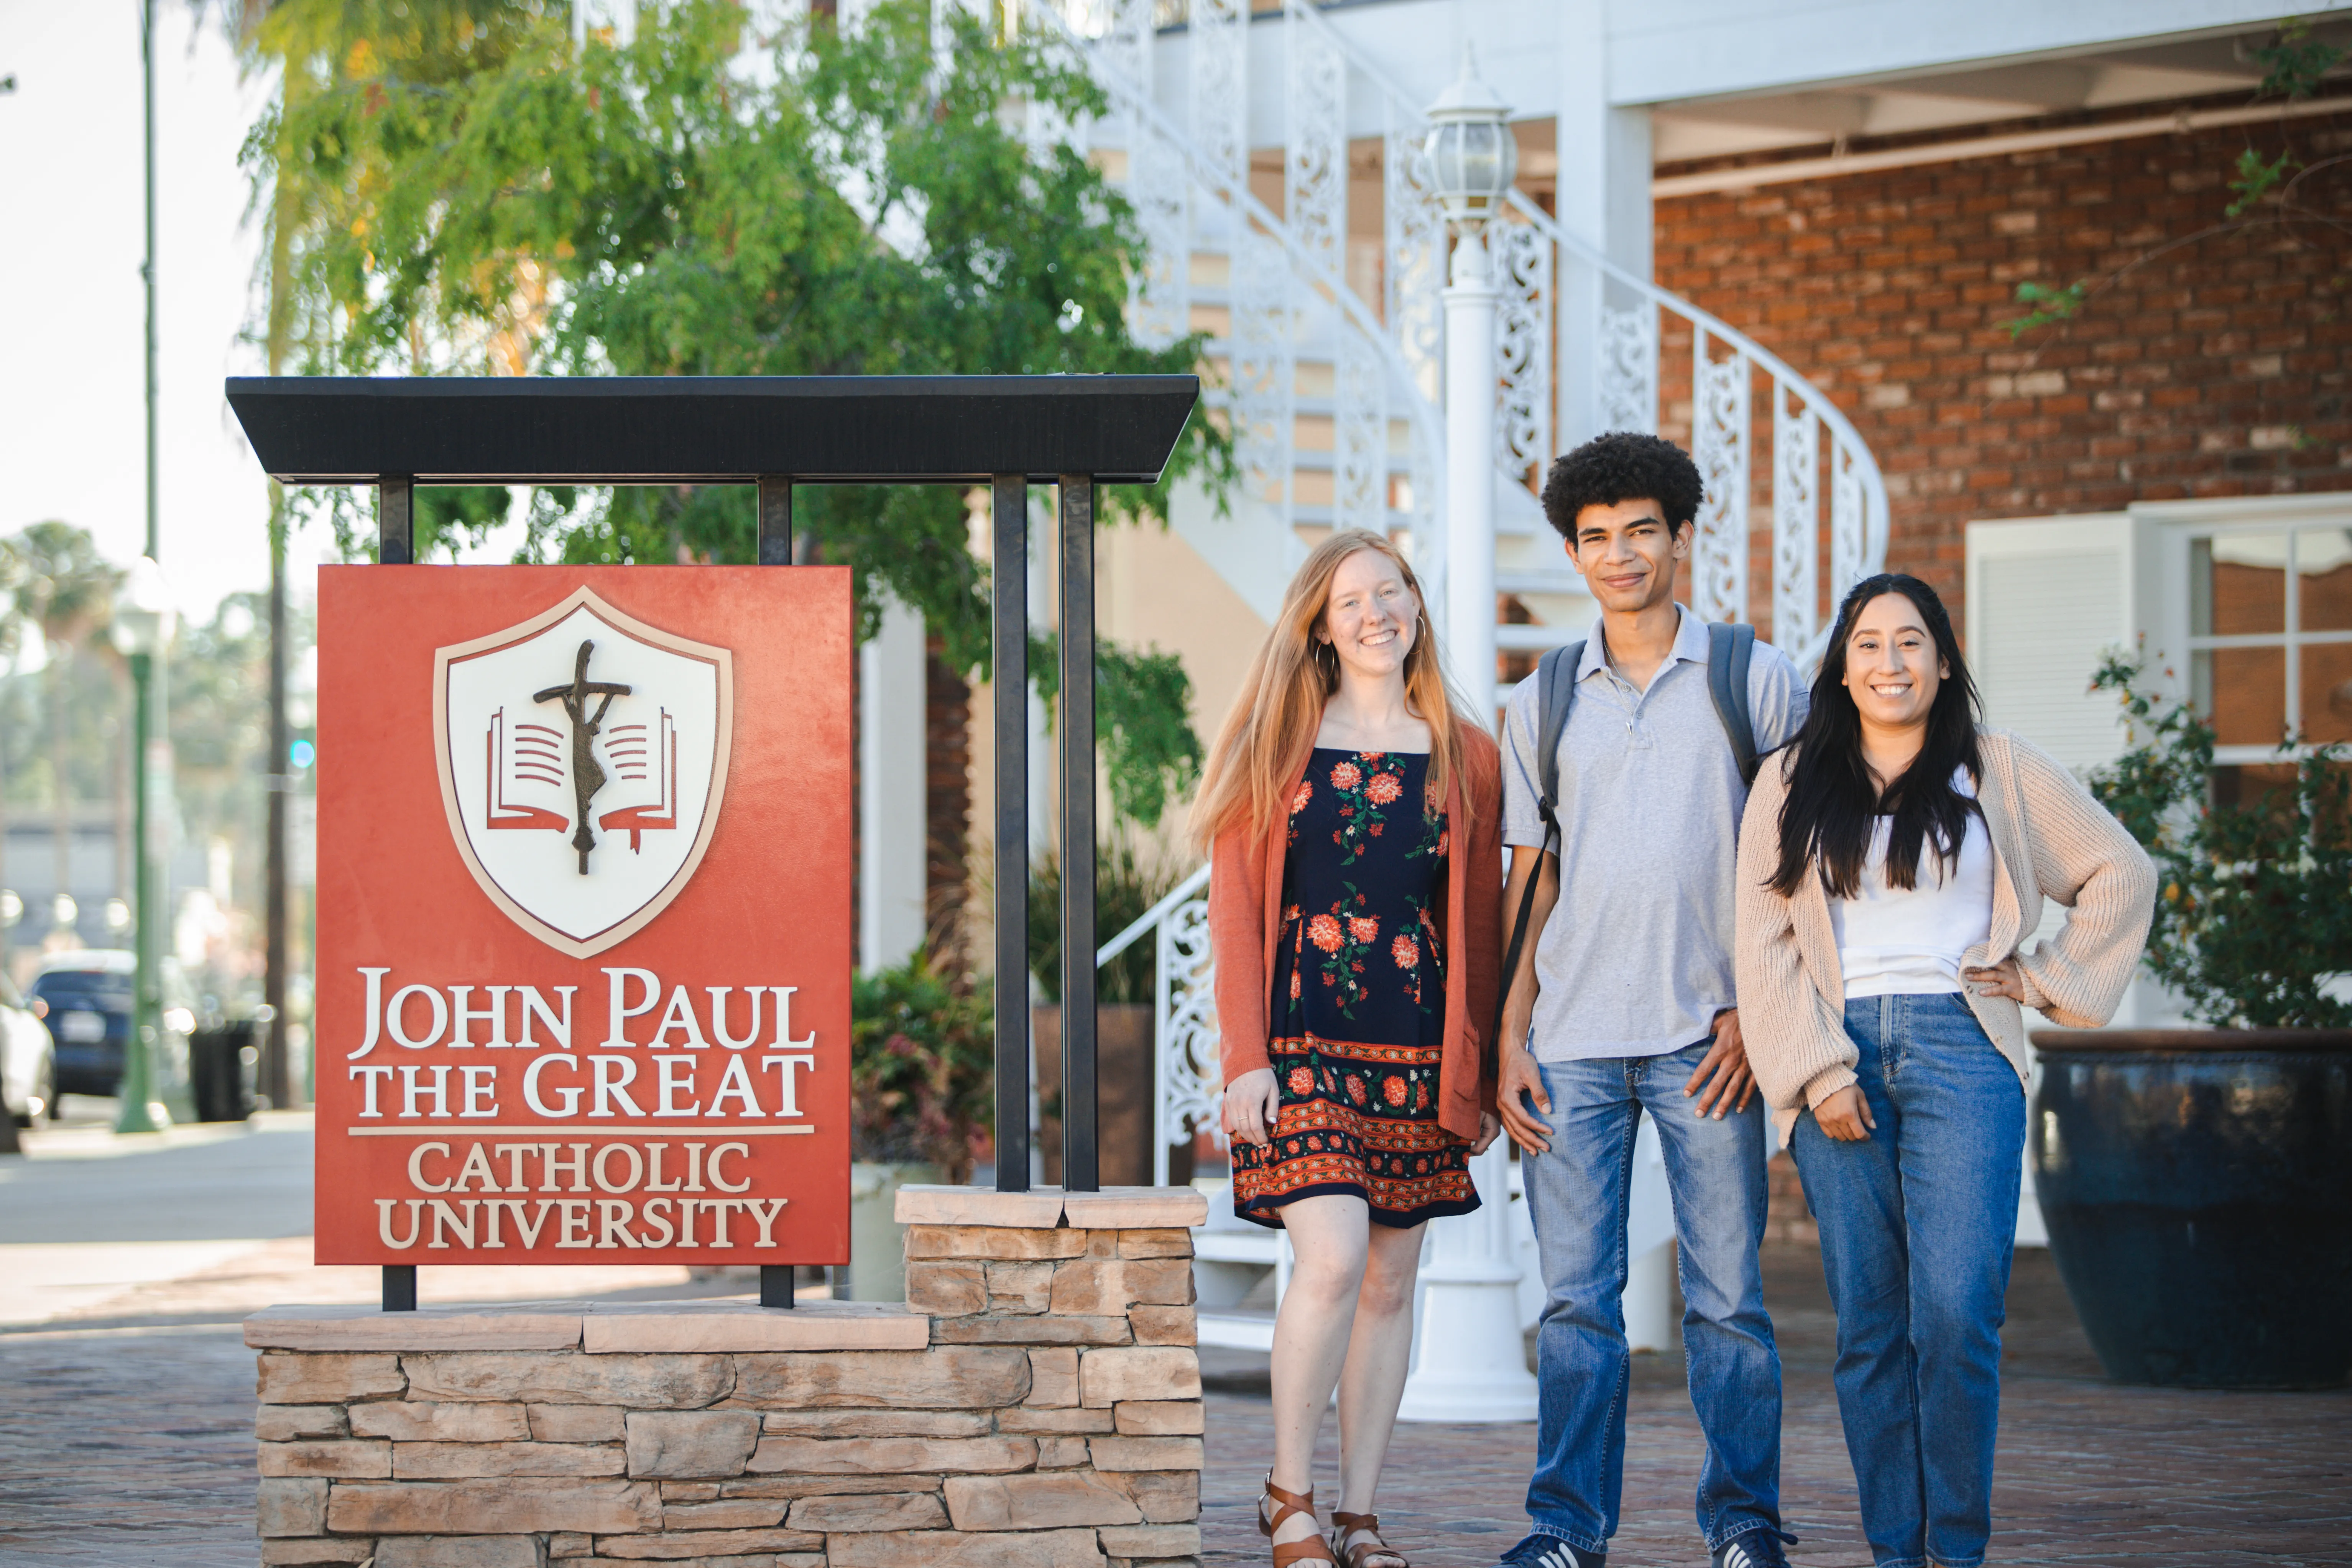 John Paul the Great Catholic University is a Catholic liberal arts college located in the northern suburbs of San Diego. The school features hands-on creative programs in film, animation, design, music, and acting, as well as business entrepreneurship, combined with an education in theology, philosophy, and the humanities.?w=200&h=150